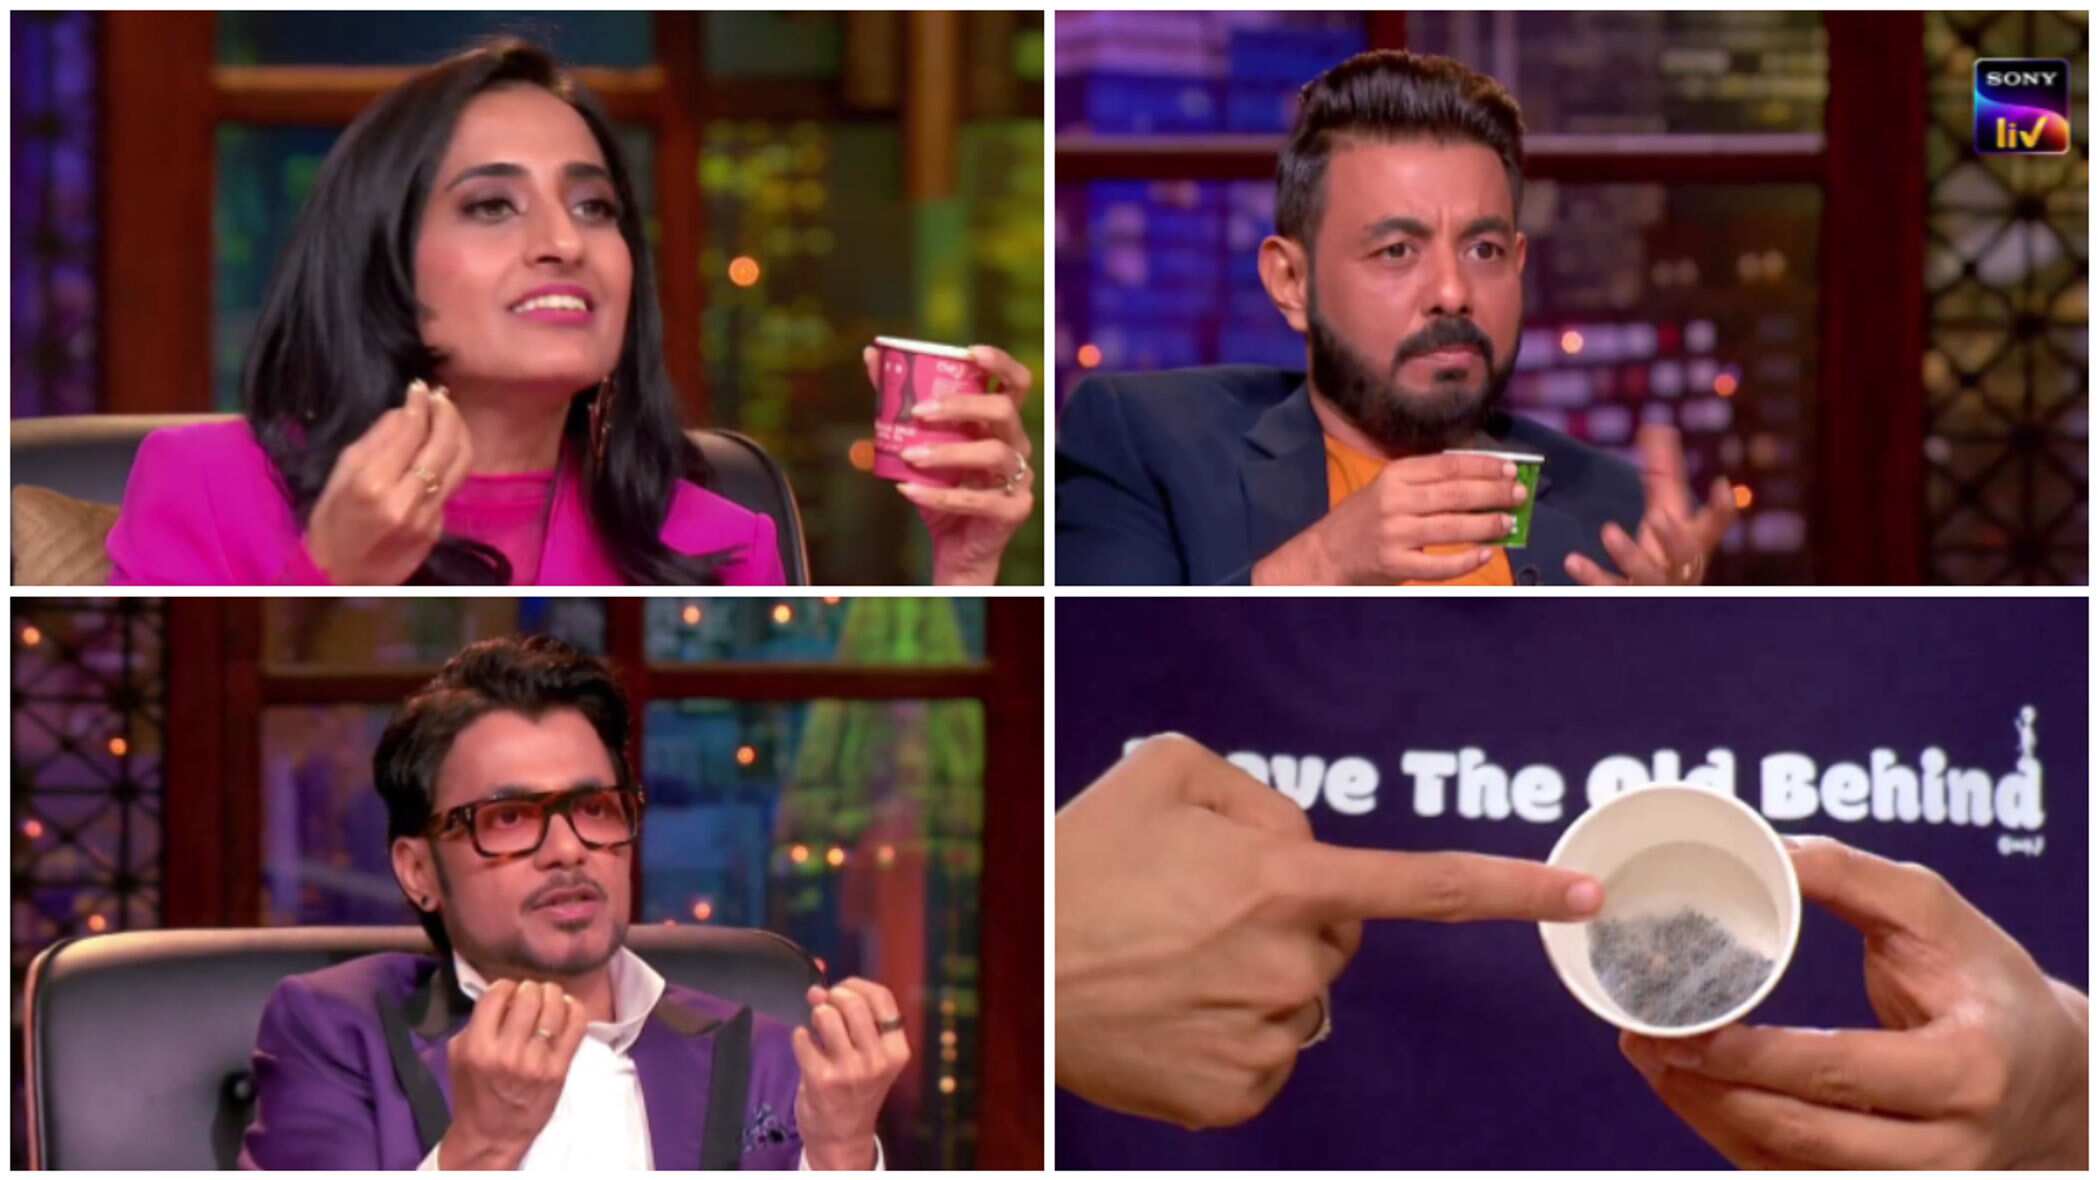 https://www.mobilemasala.com/film-gossip/Shark-Tank-India-3-Pitchers-of-a-green-tea-selling-brand-get-in-a-heated-conversation-with-investors-know-why-i222434